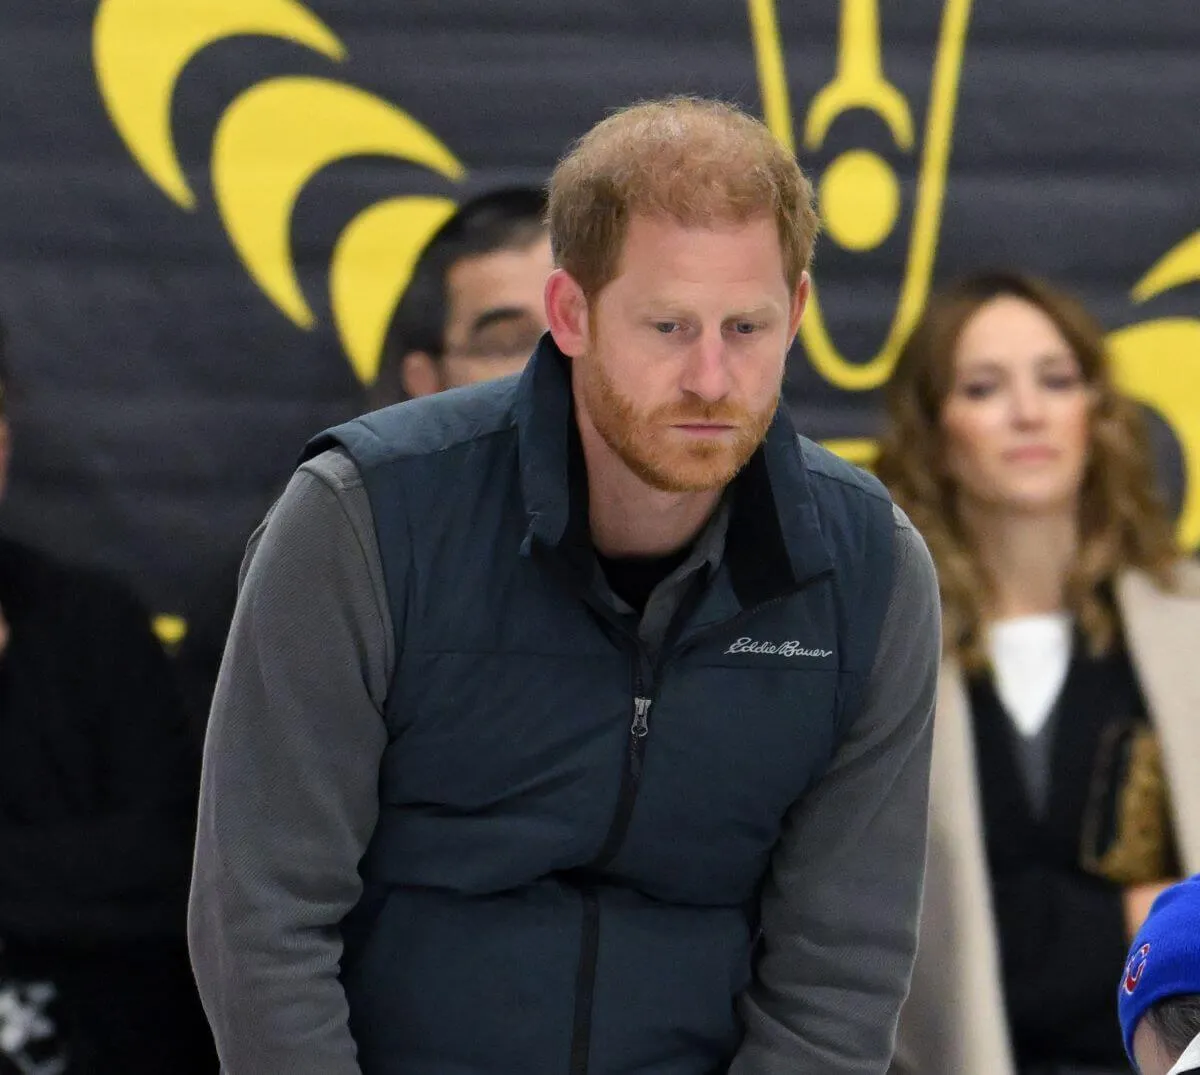 Prince Harry attends the Invictus Games One Year To Go Winter Training Camp at Hillcrest Community Centre in Vancouver, Canada  